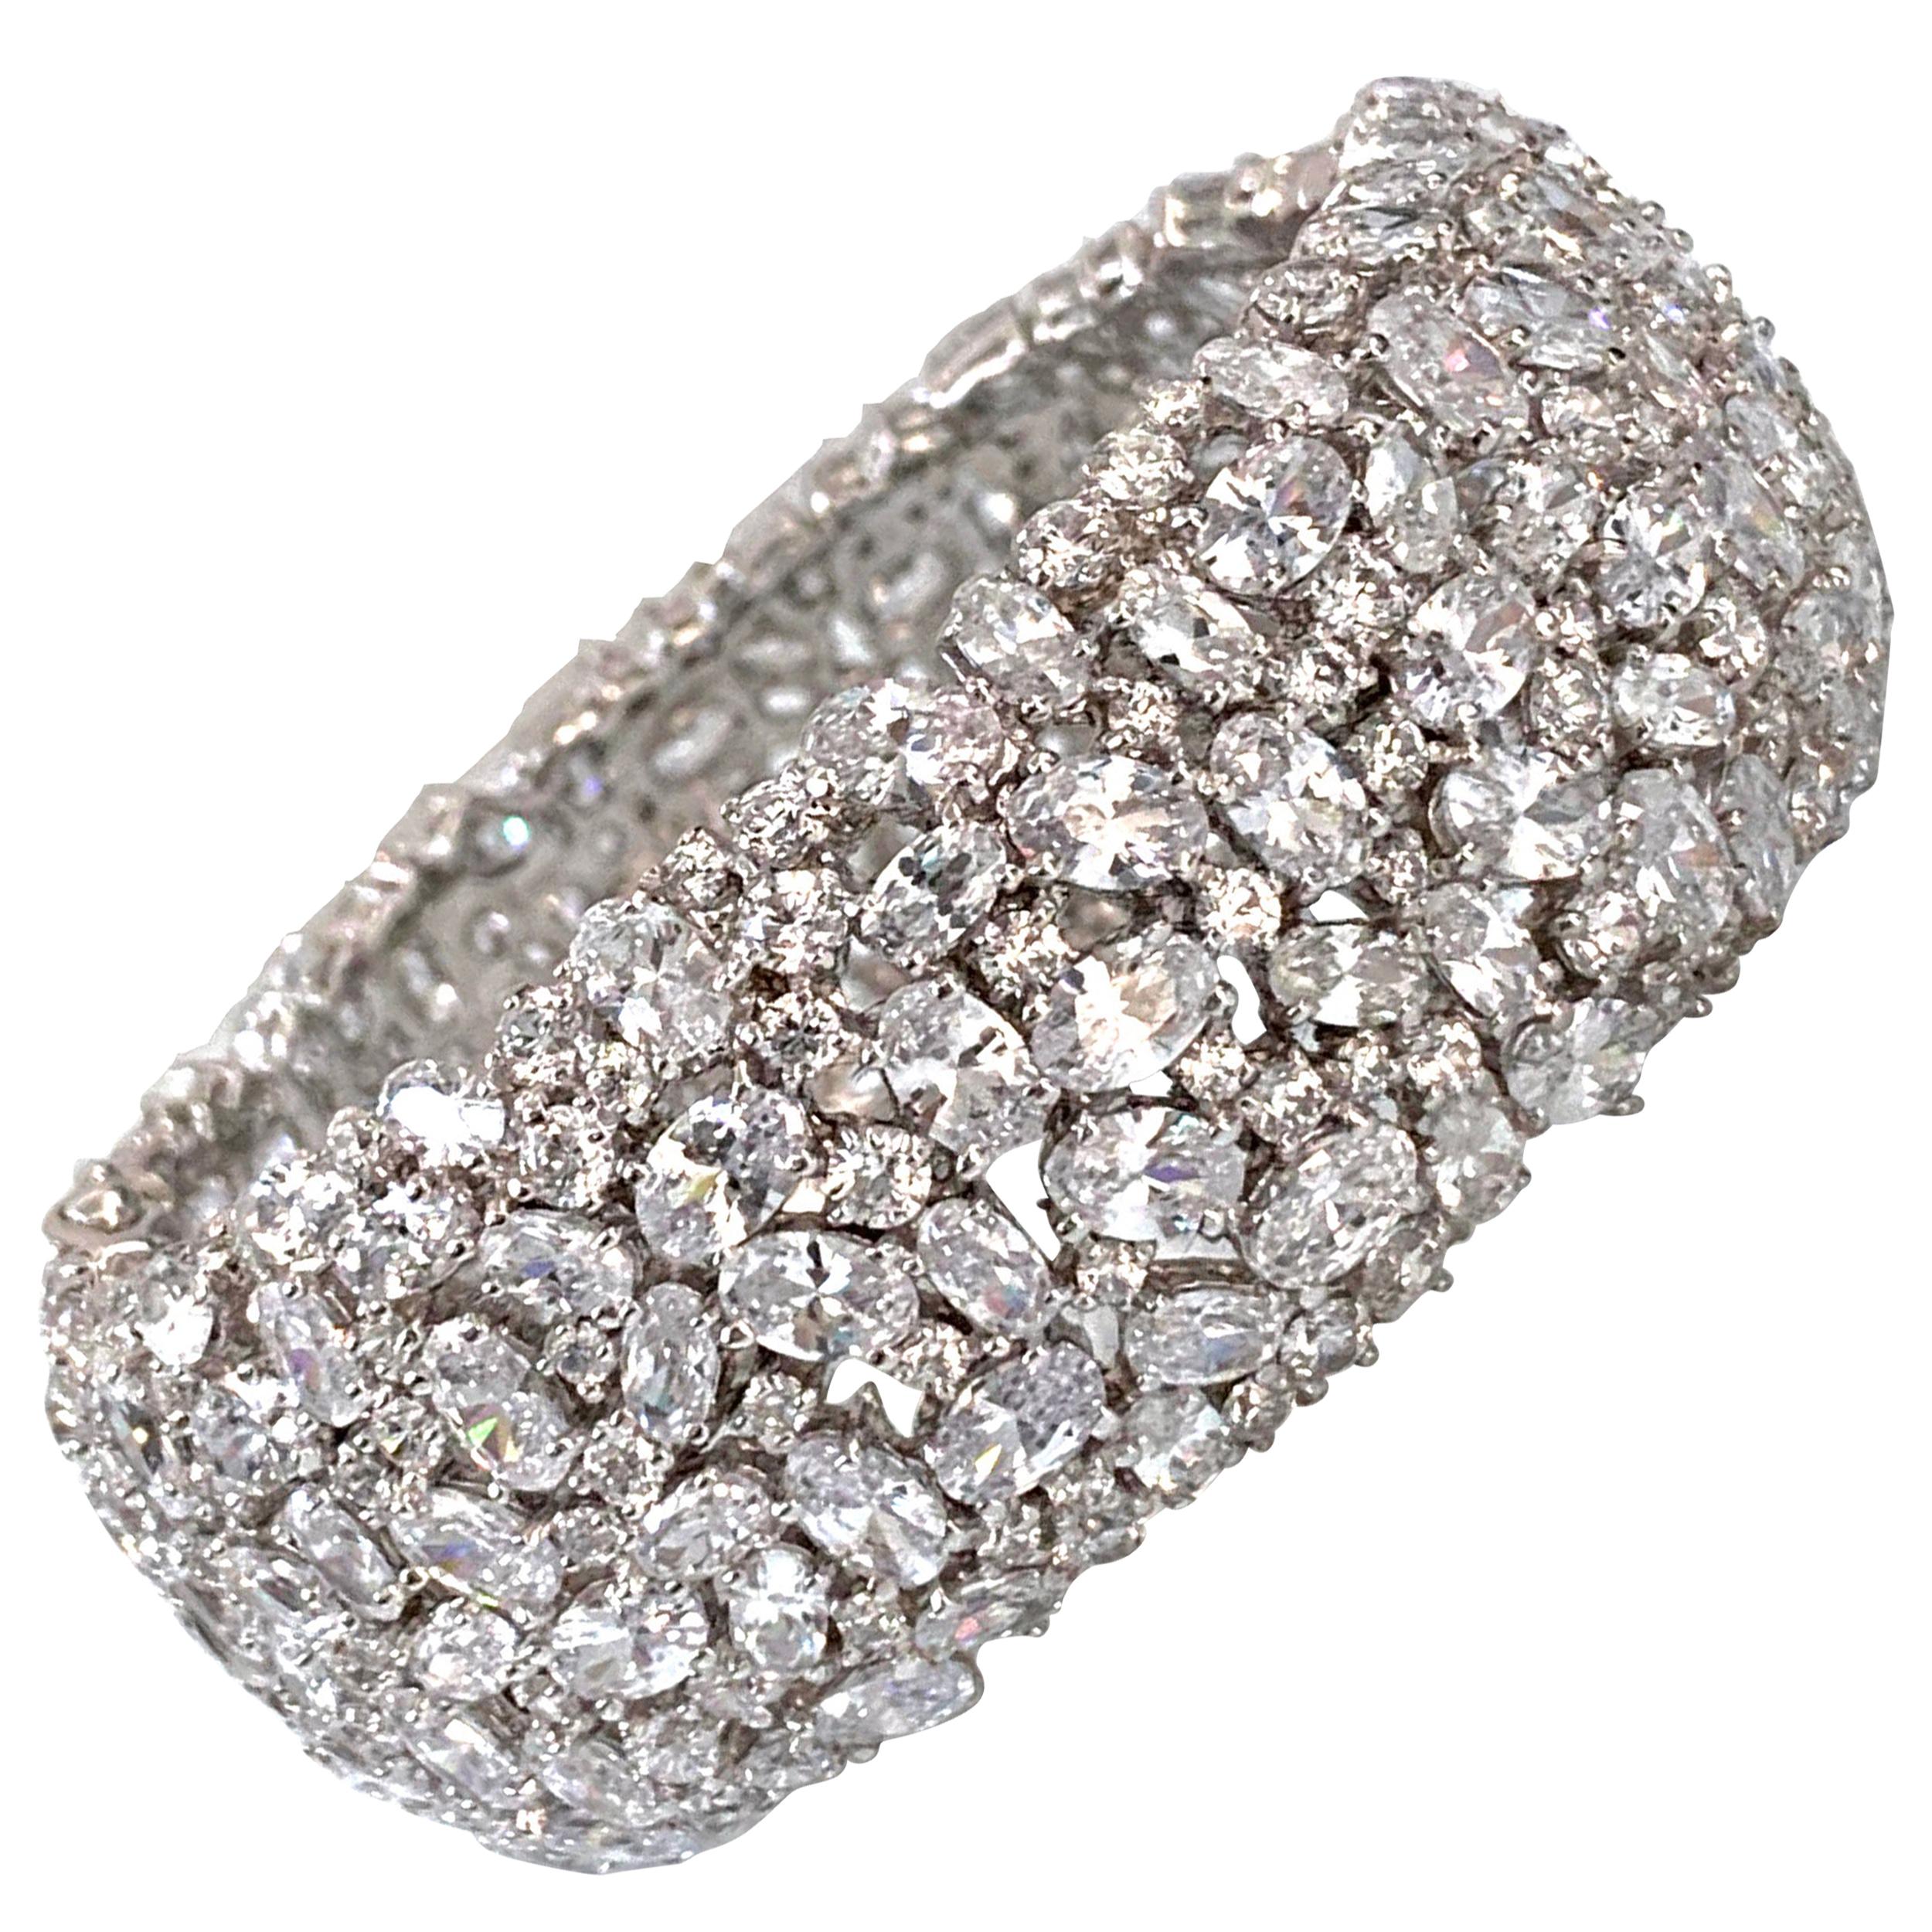 Striking All-around Encrusted Cubic Zirconia Sterling Silver Cuff Bracelet